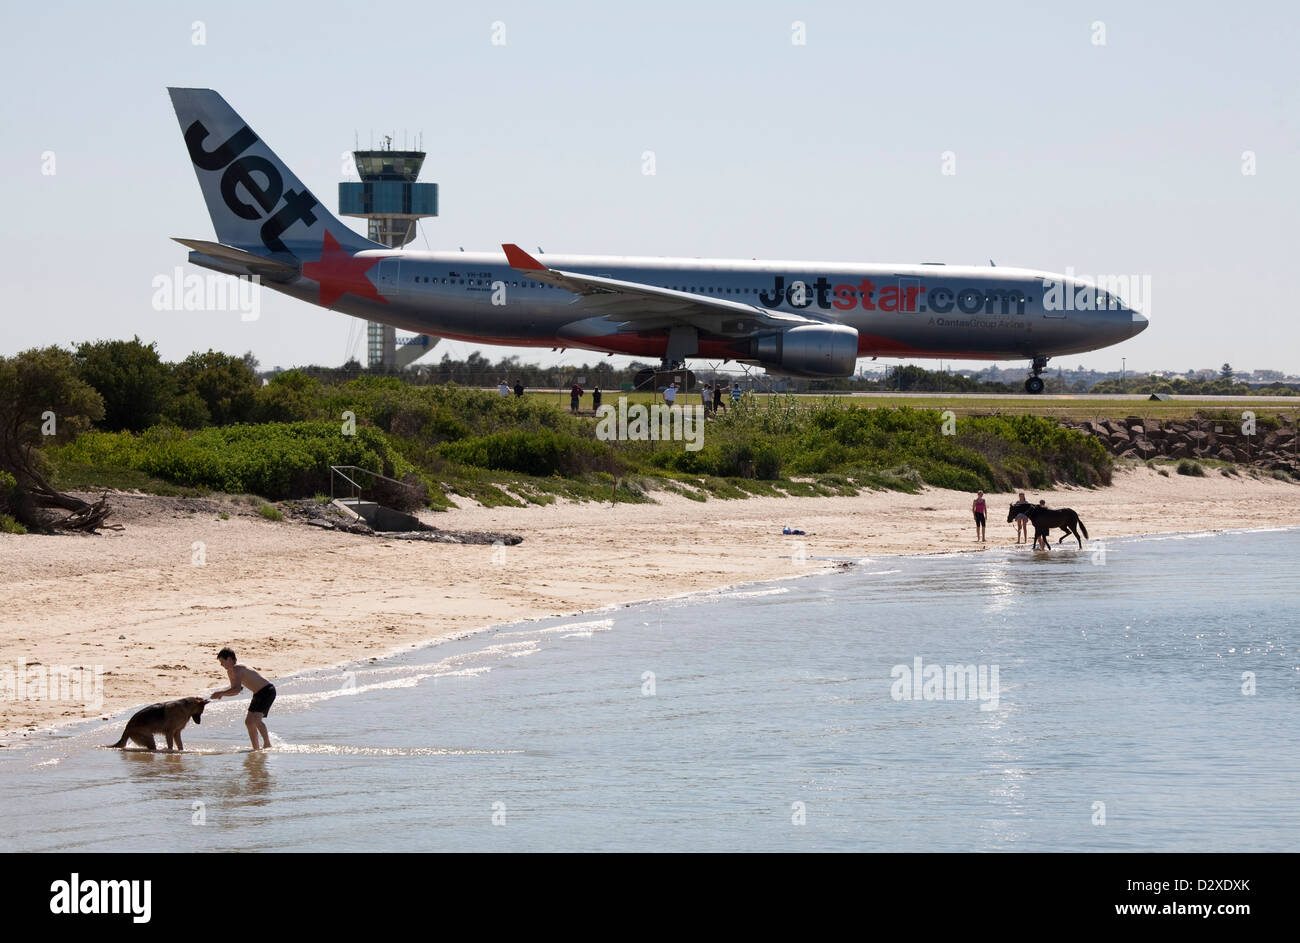 Teenager exercising  dog  in front of Jetstar Aircraft taxiing past beach at Kingsford Smith Airport Sydney Australia Stock Photo